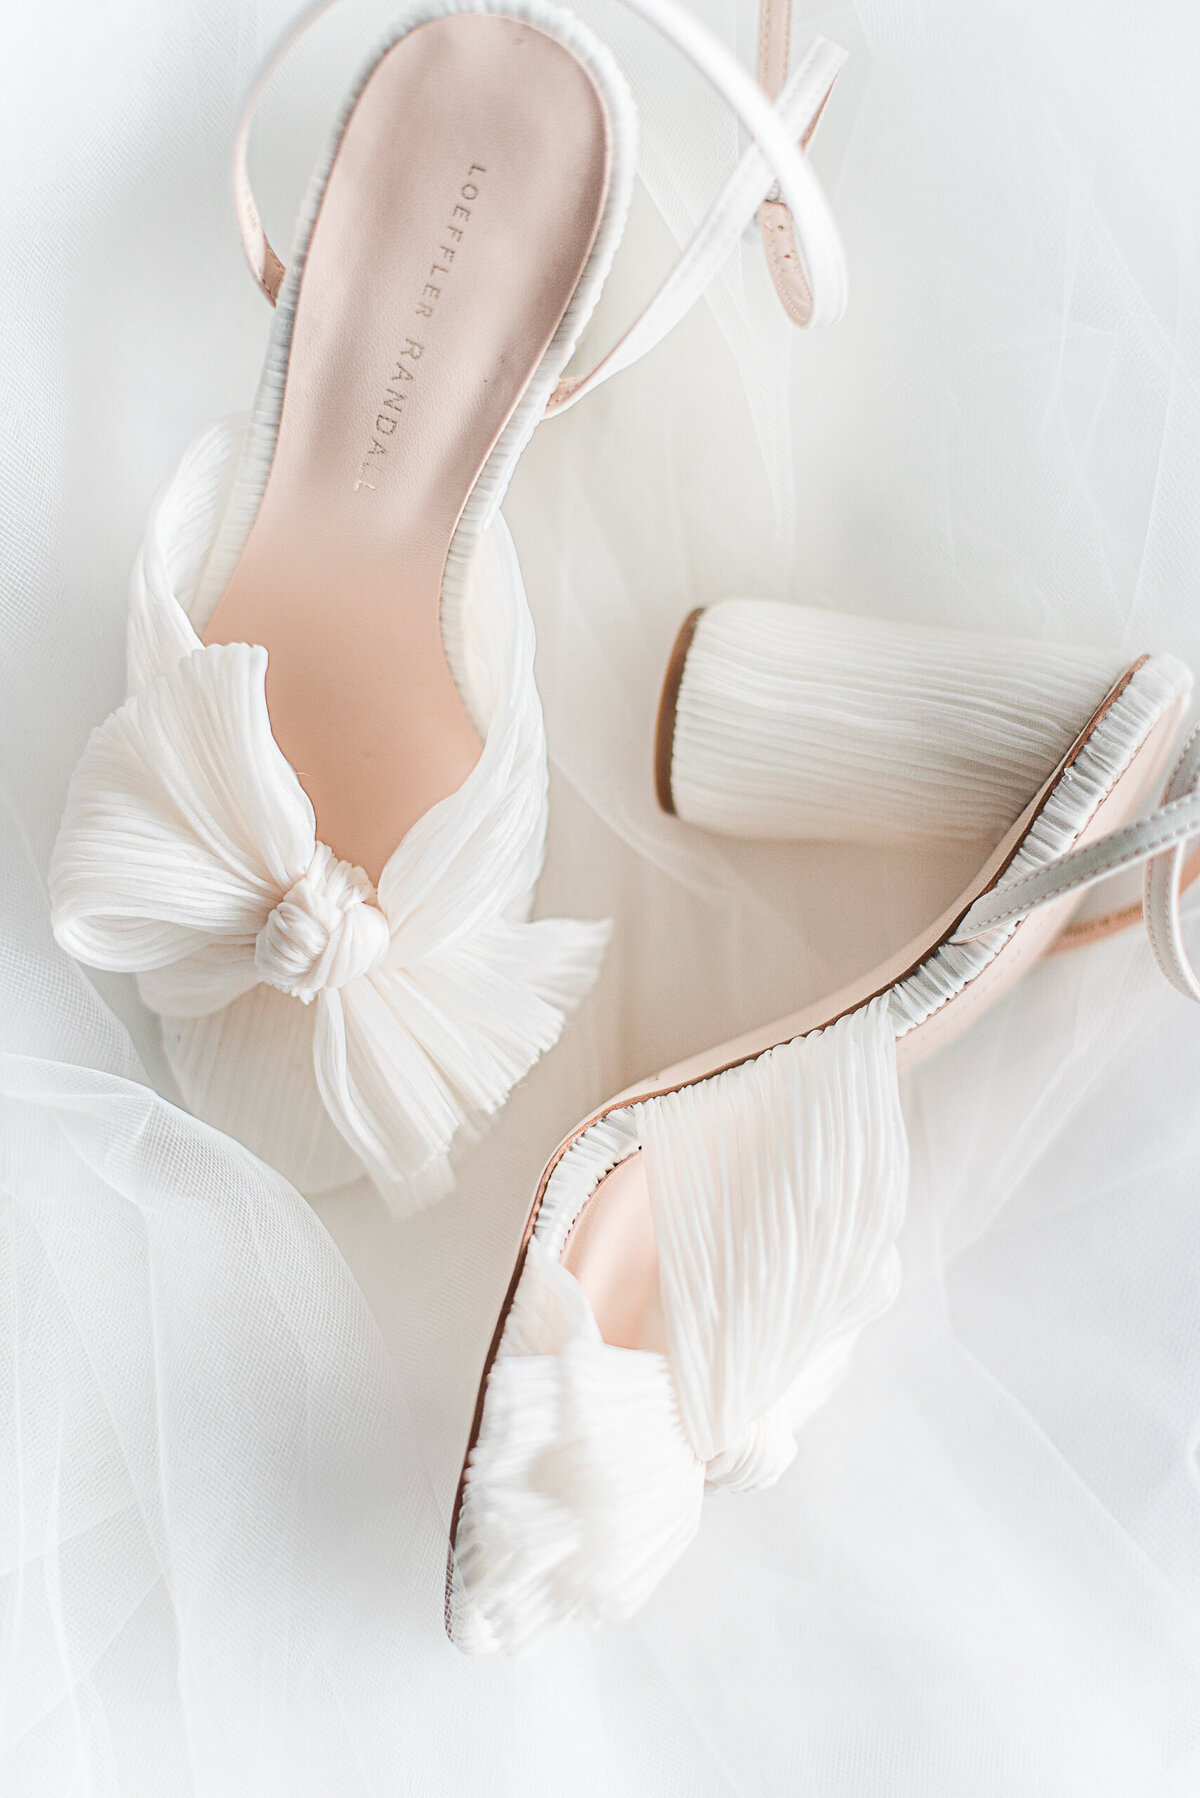 loeffer randall white wedding shoes with bow